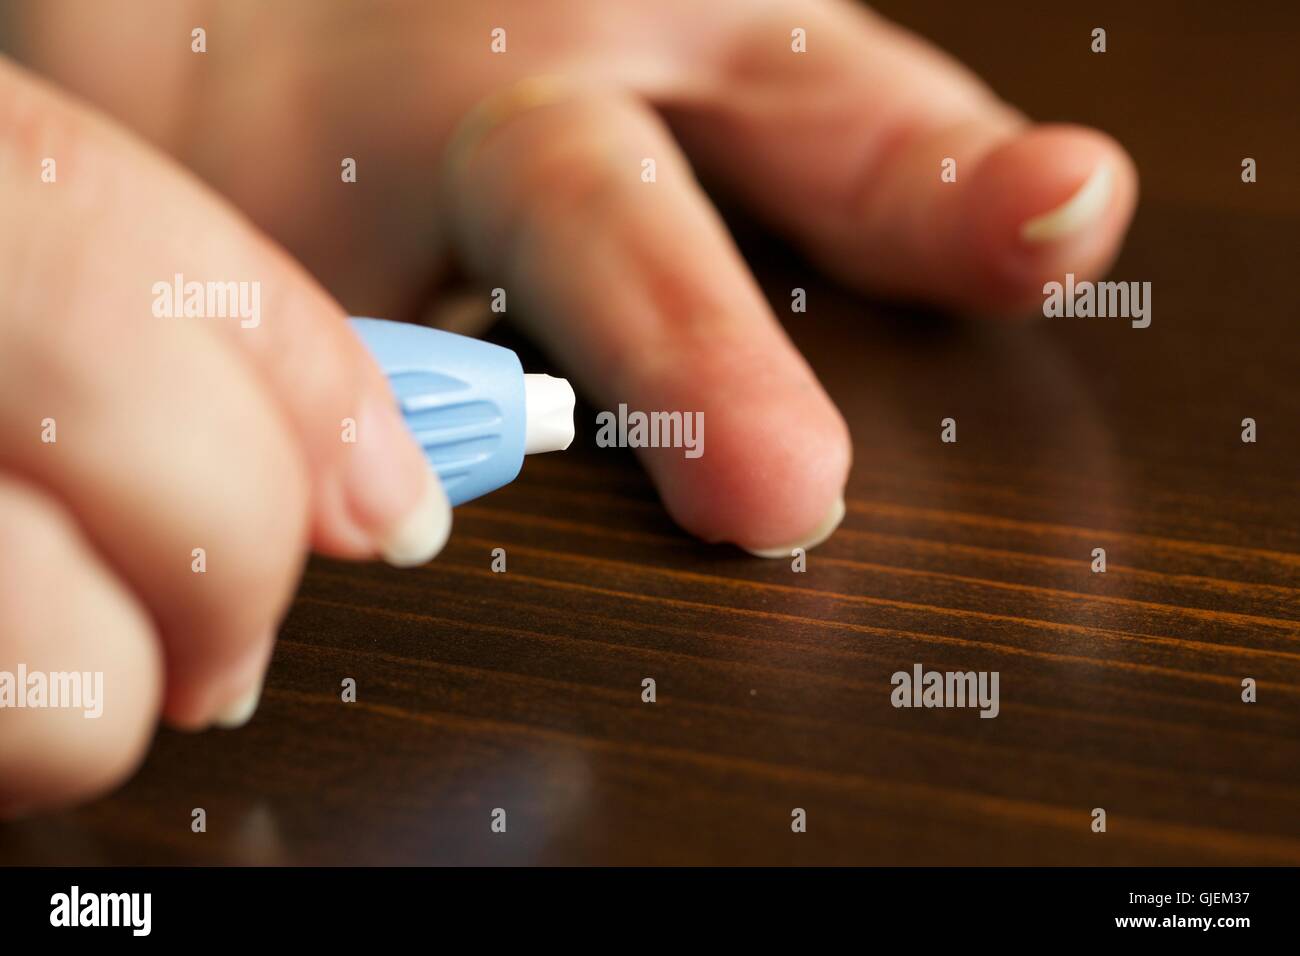 Woman using safety lancet to draw blood from finger for test. Stock Photo